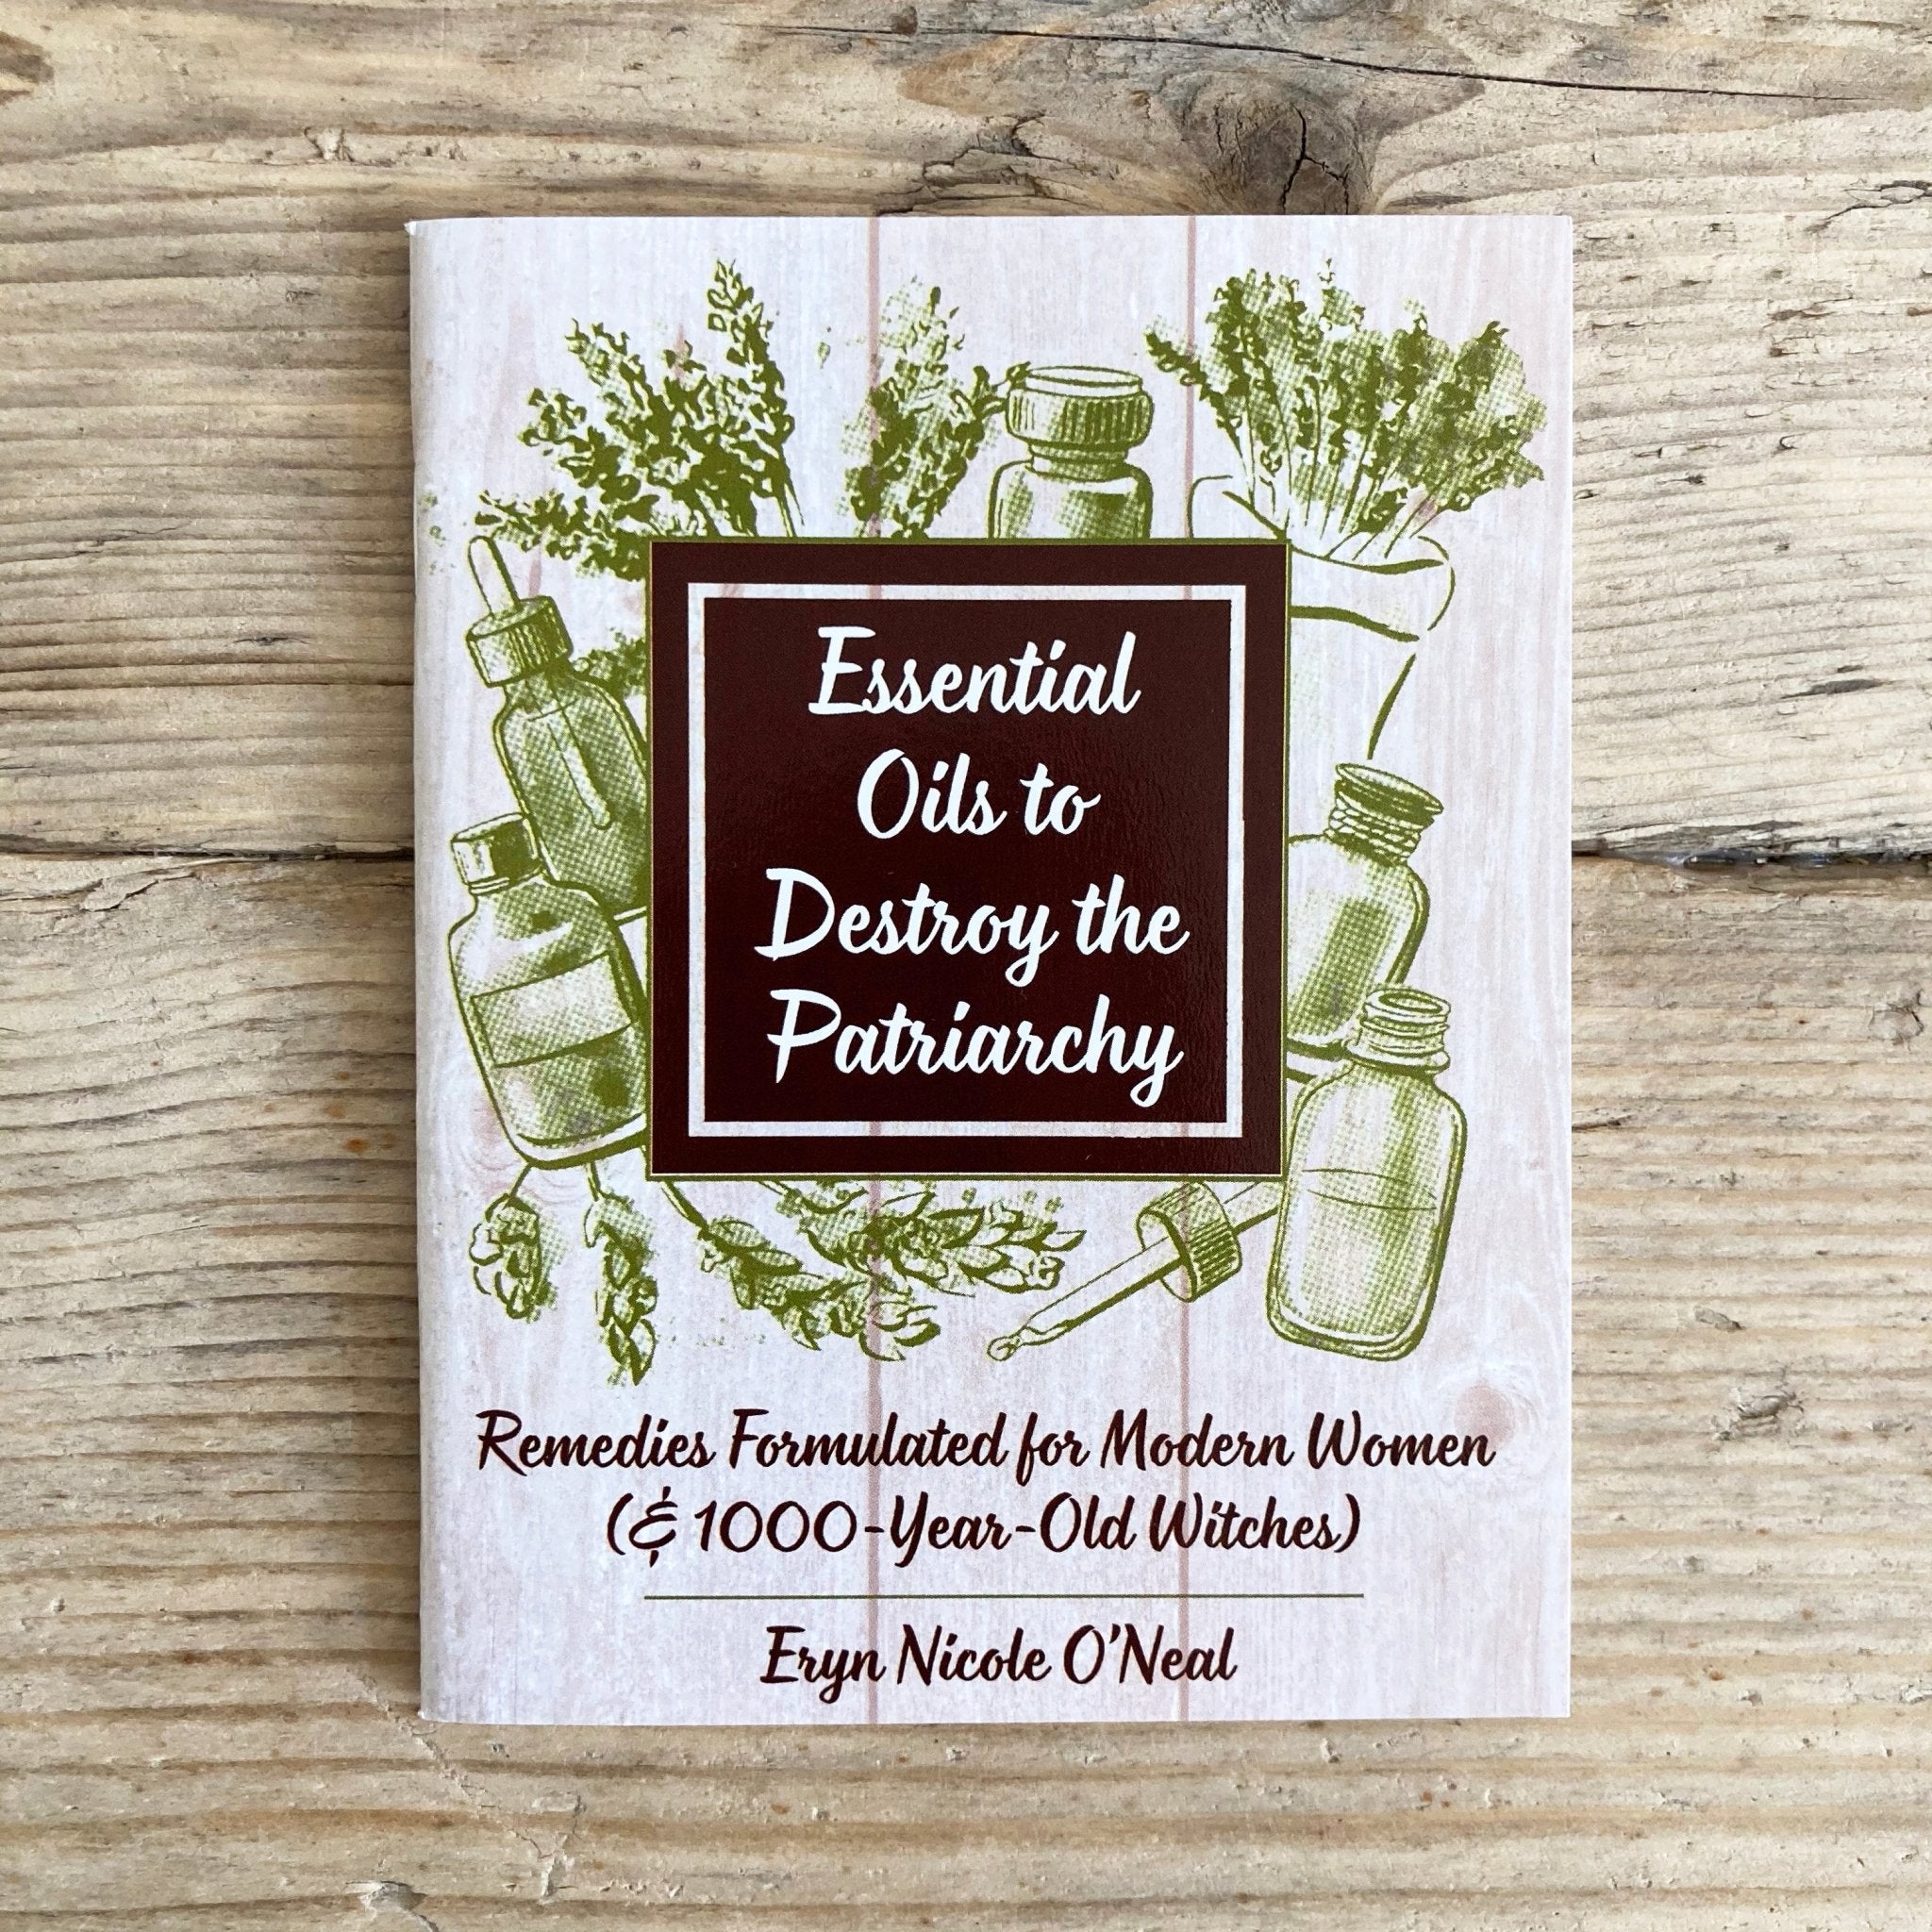 Essential Oils to Destroy the Patriarchy: Remedies Formulated for Modern Women - Zine - Microcosm